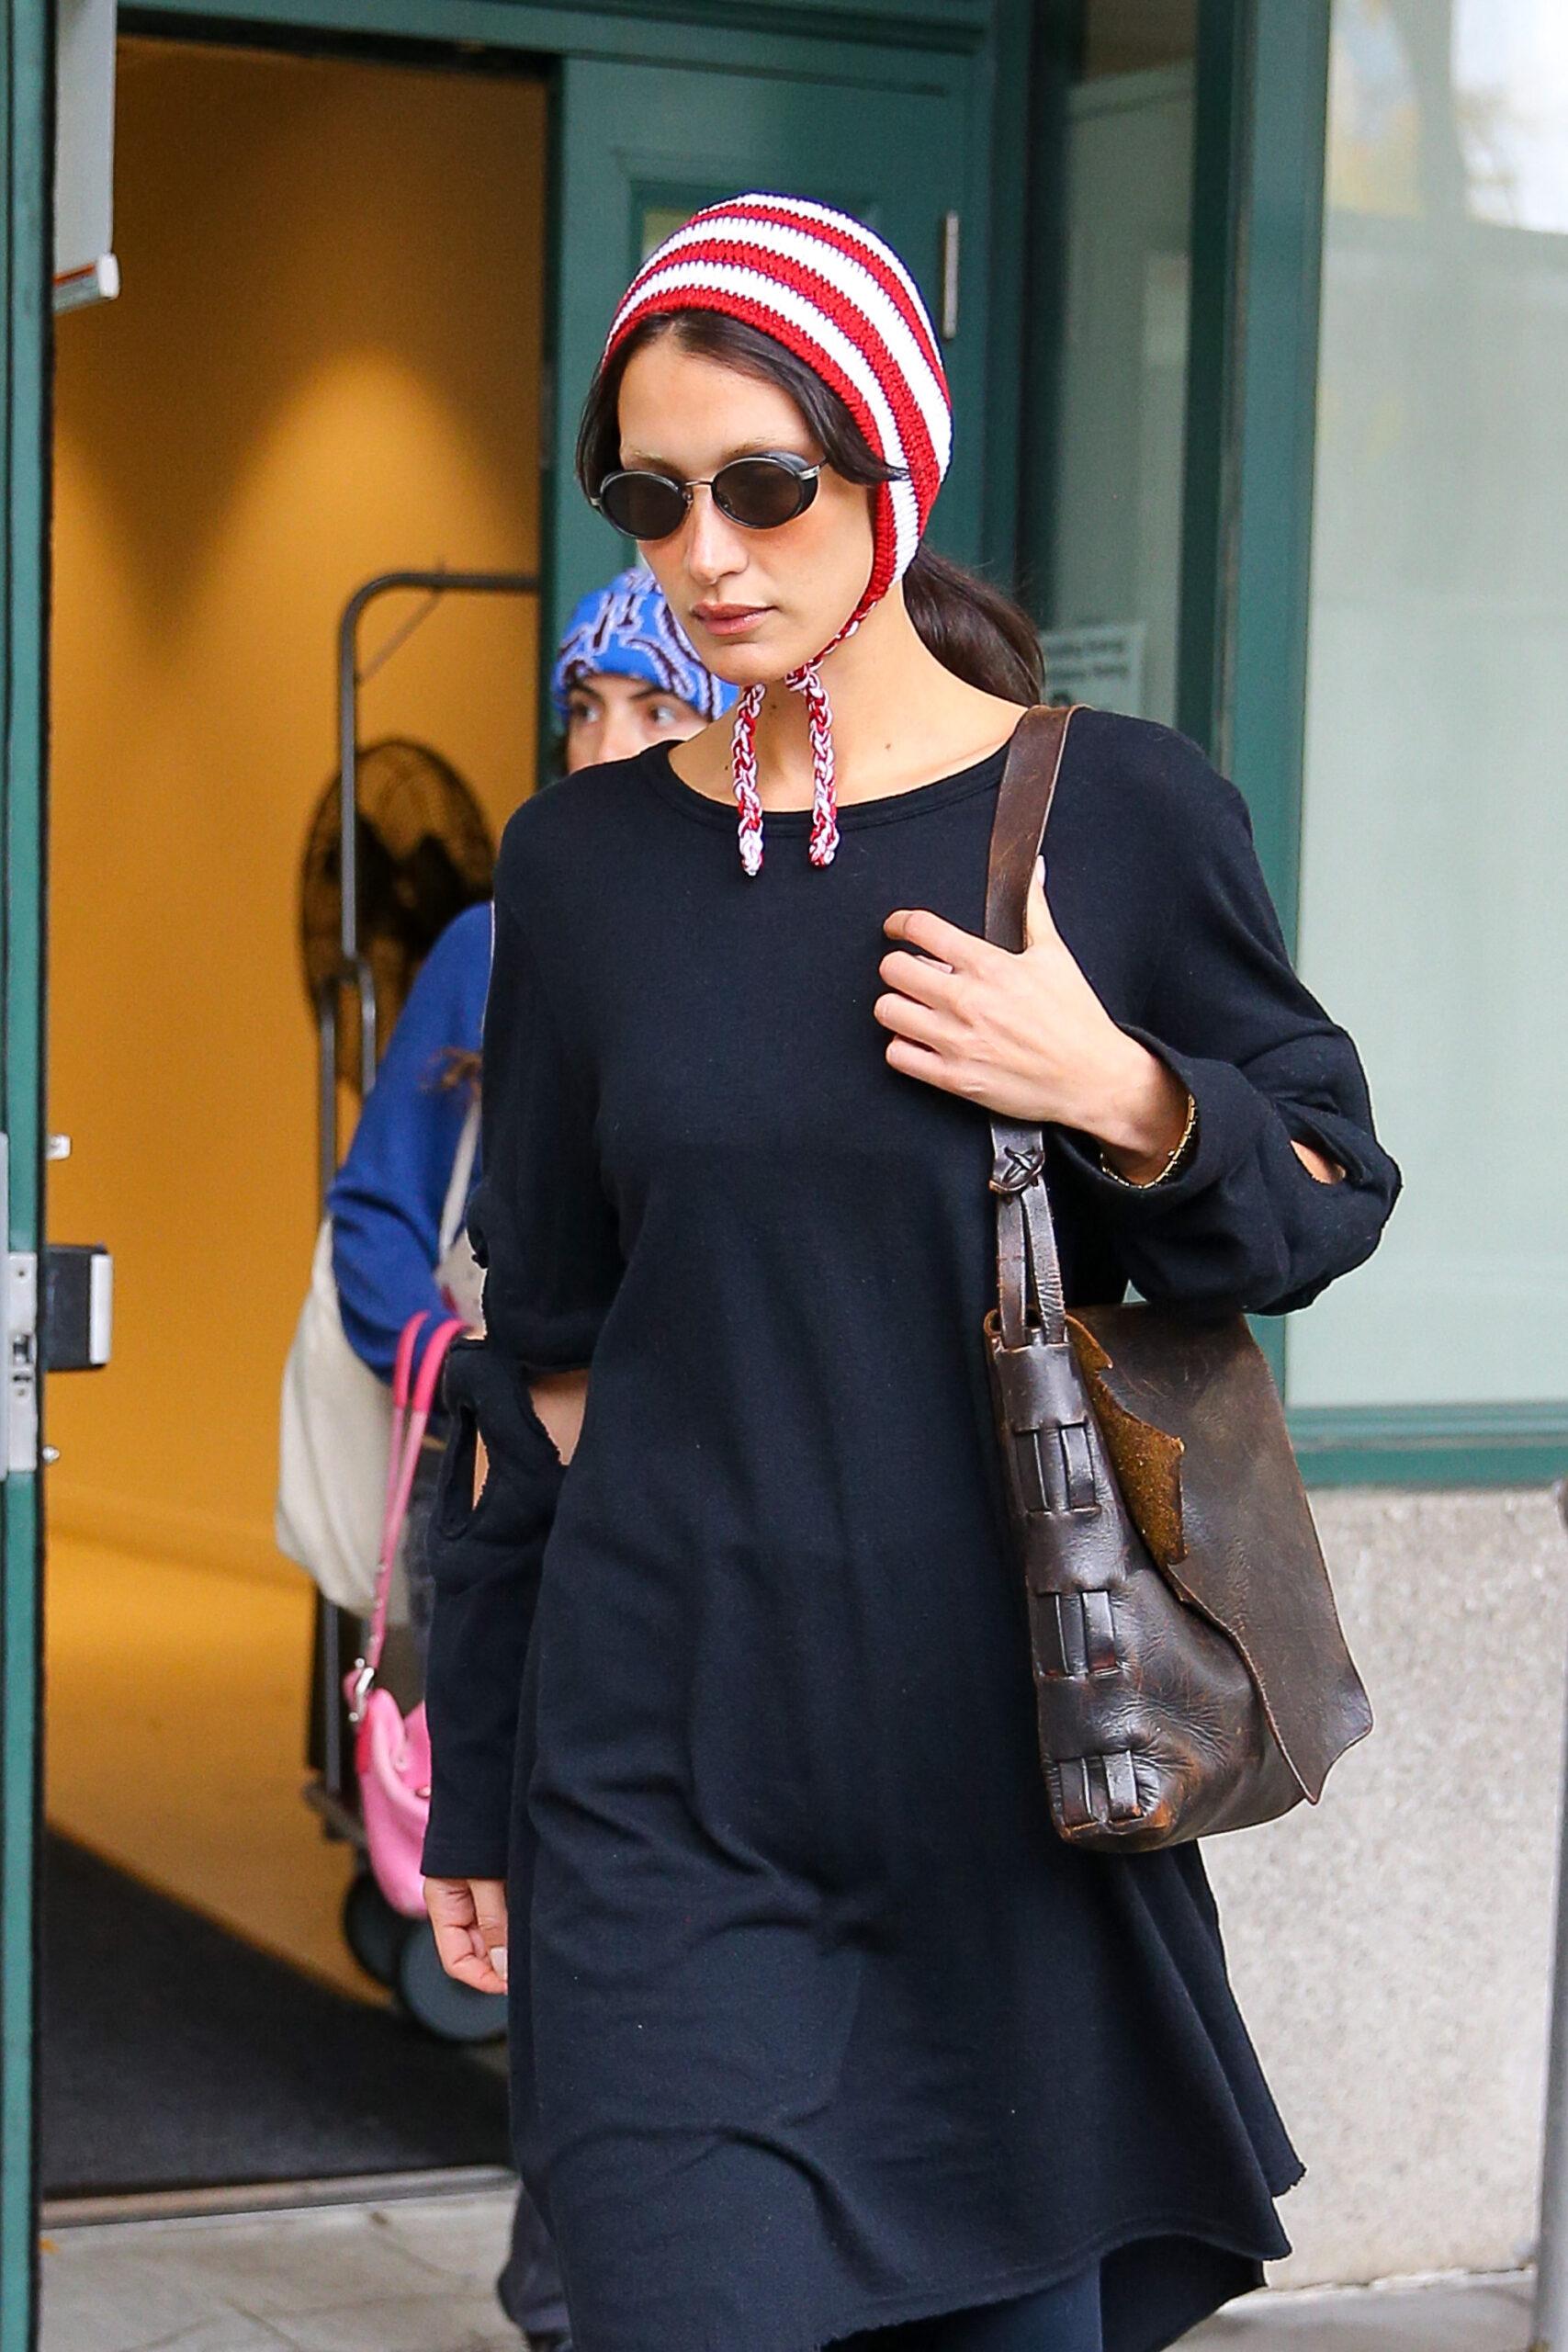 Bella Hadid was spotted heading to the airport as leaving her apartment in Tribeca New York City